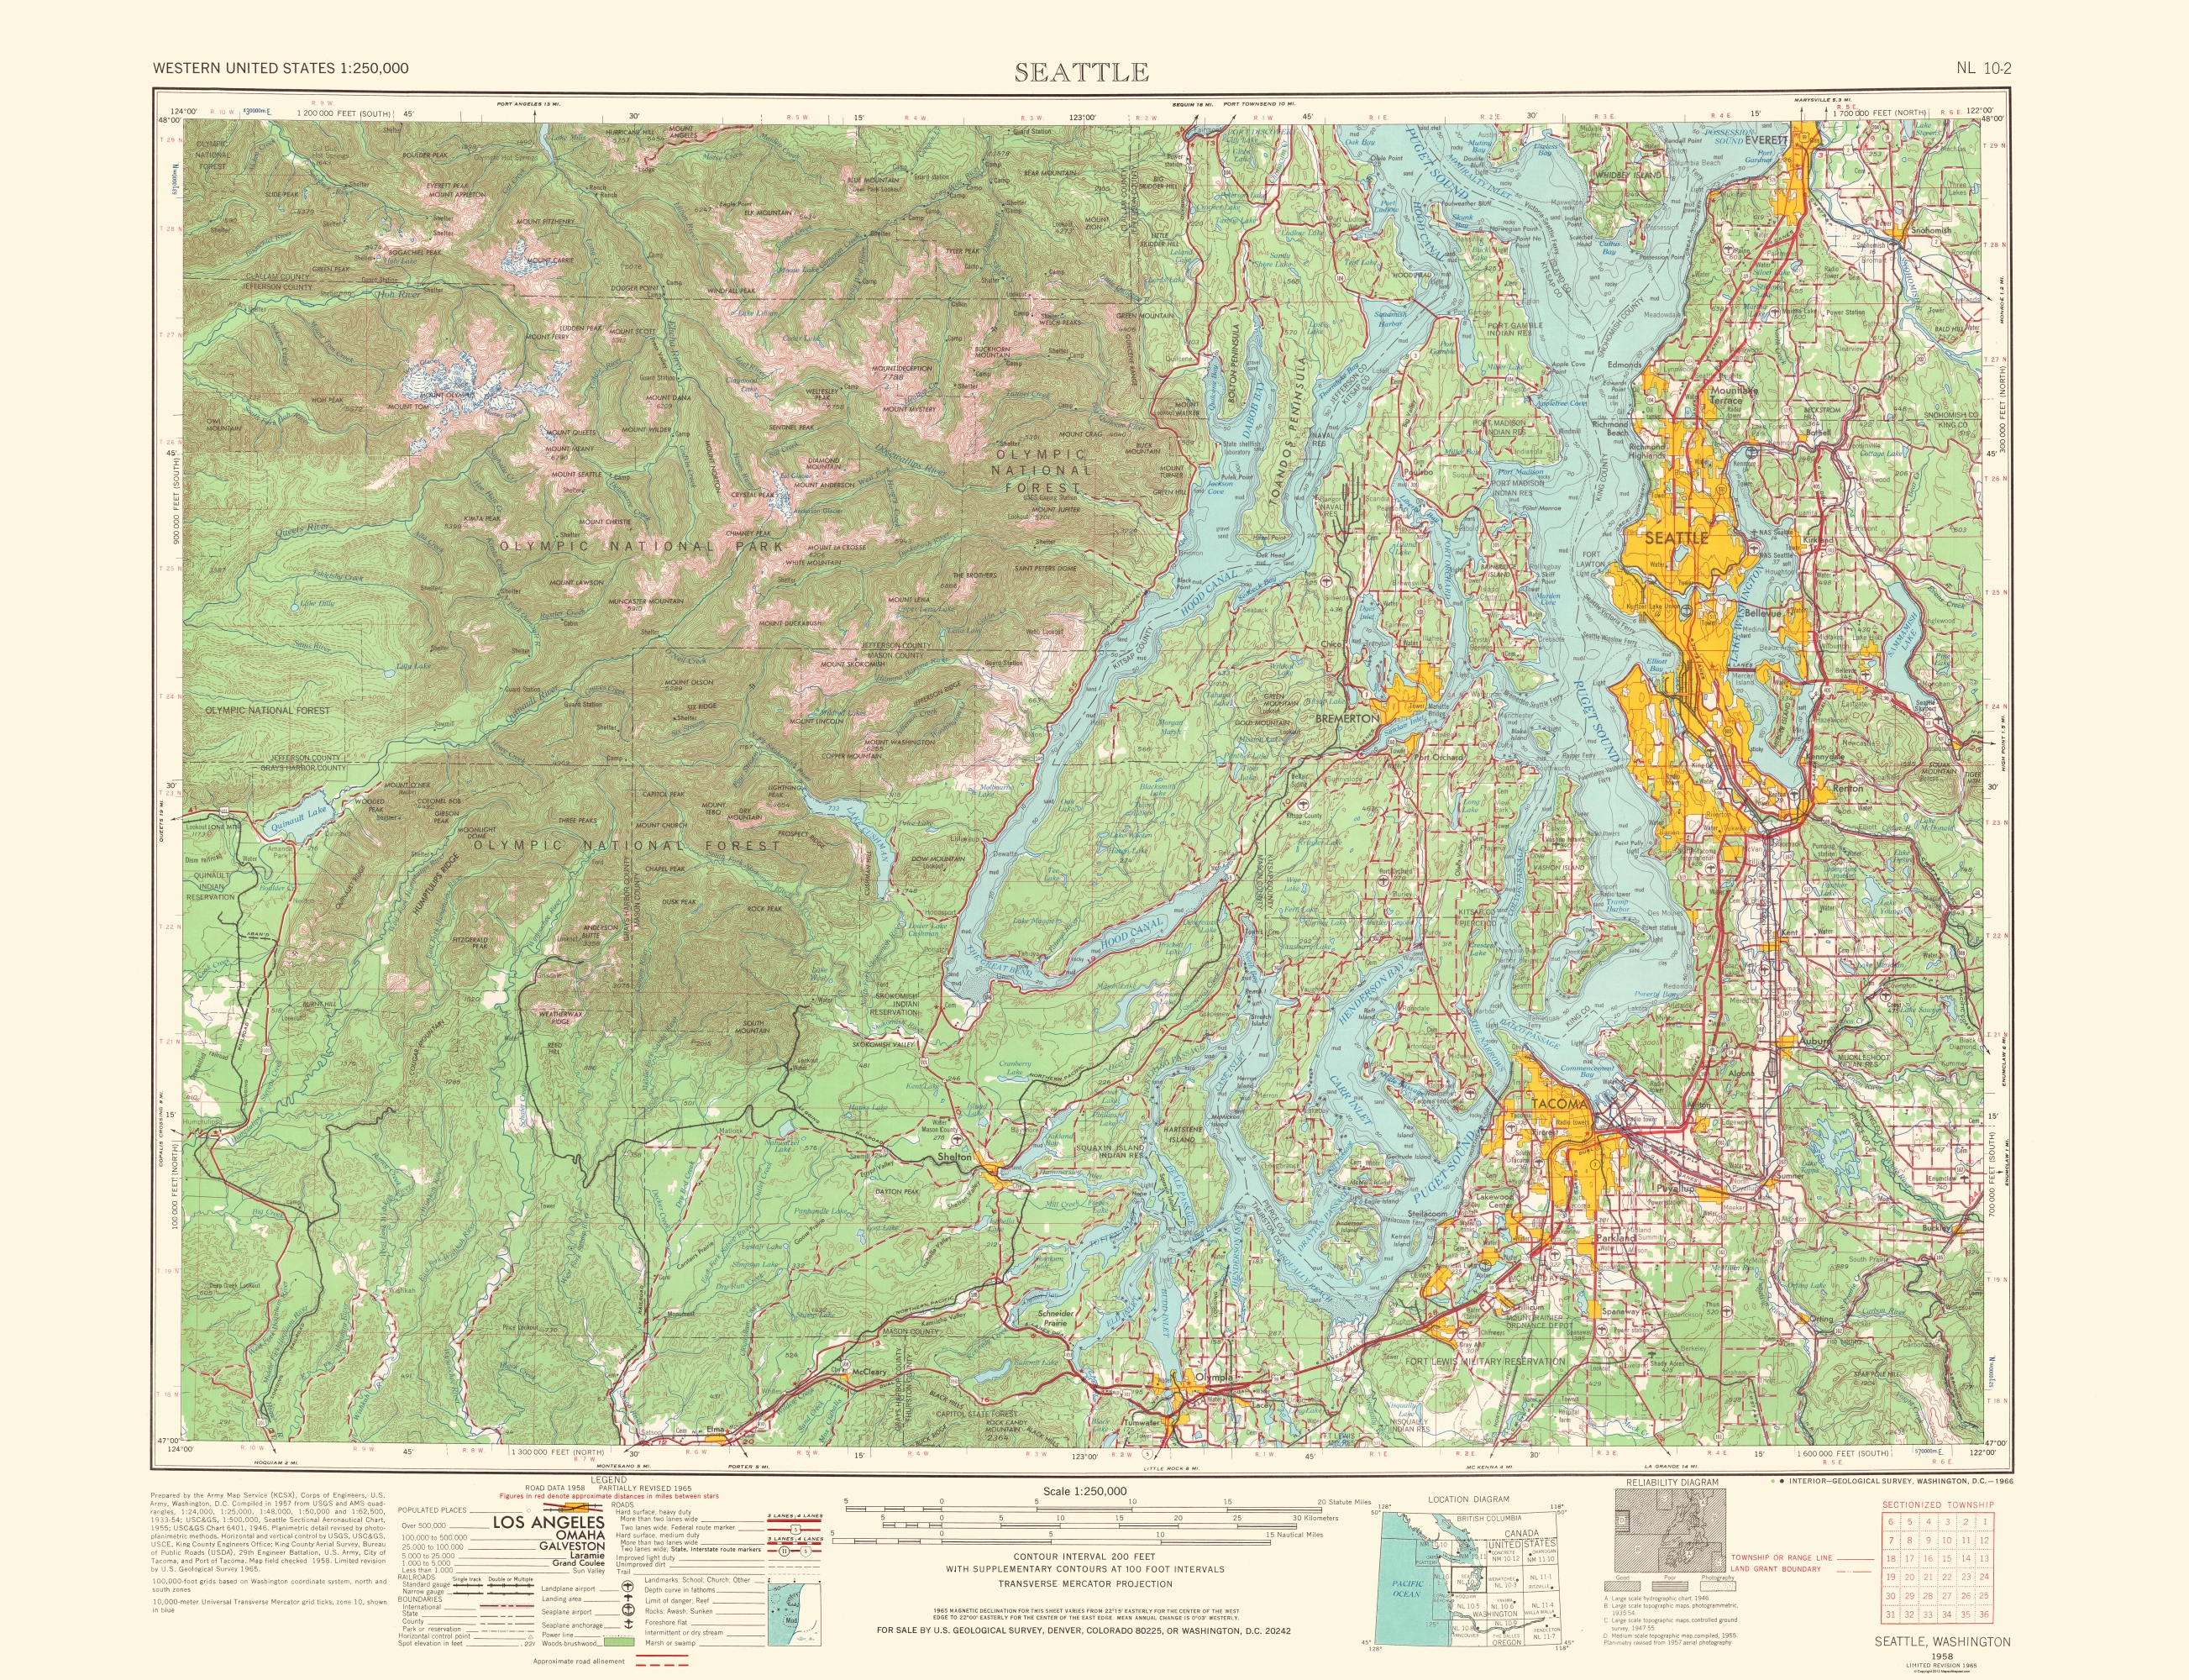 Old Topographical Map Seattle Washington 1966